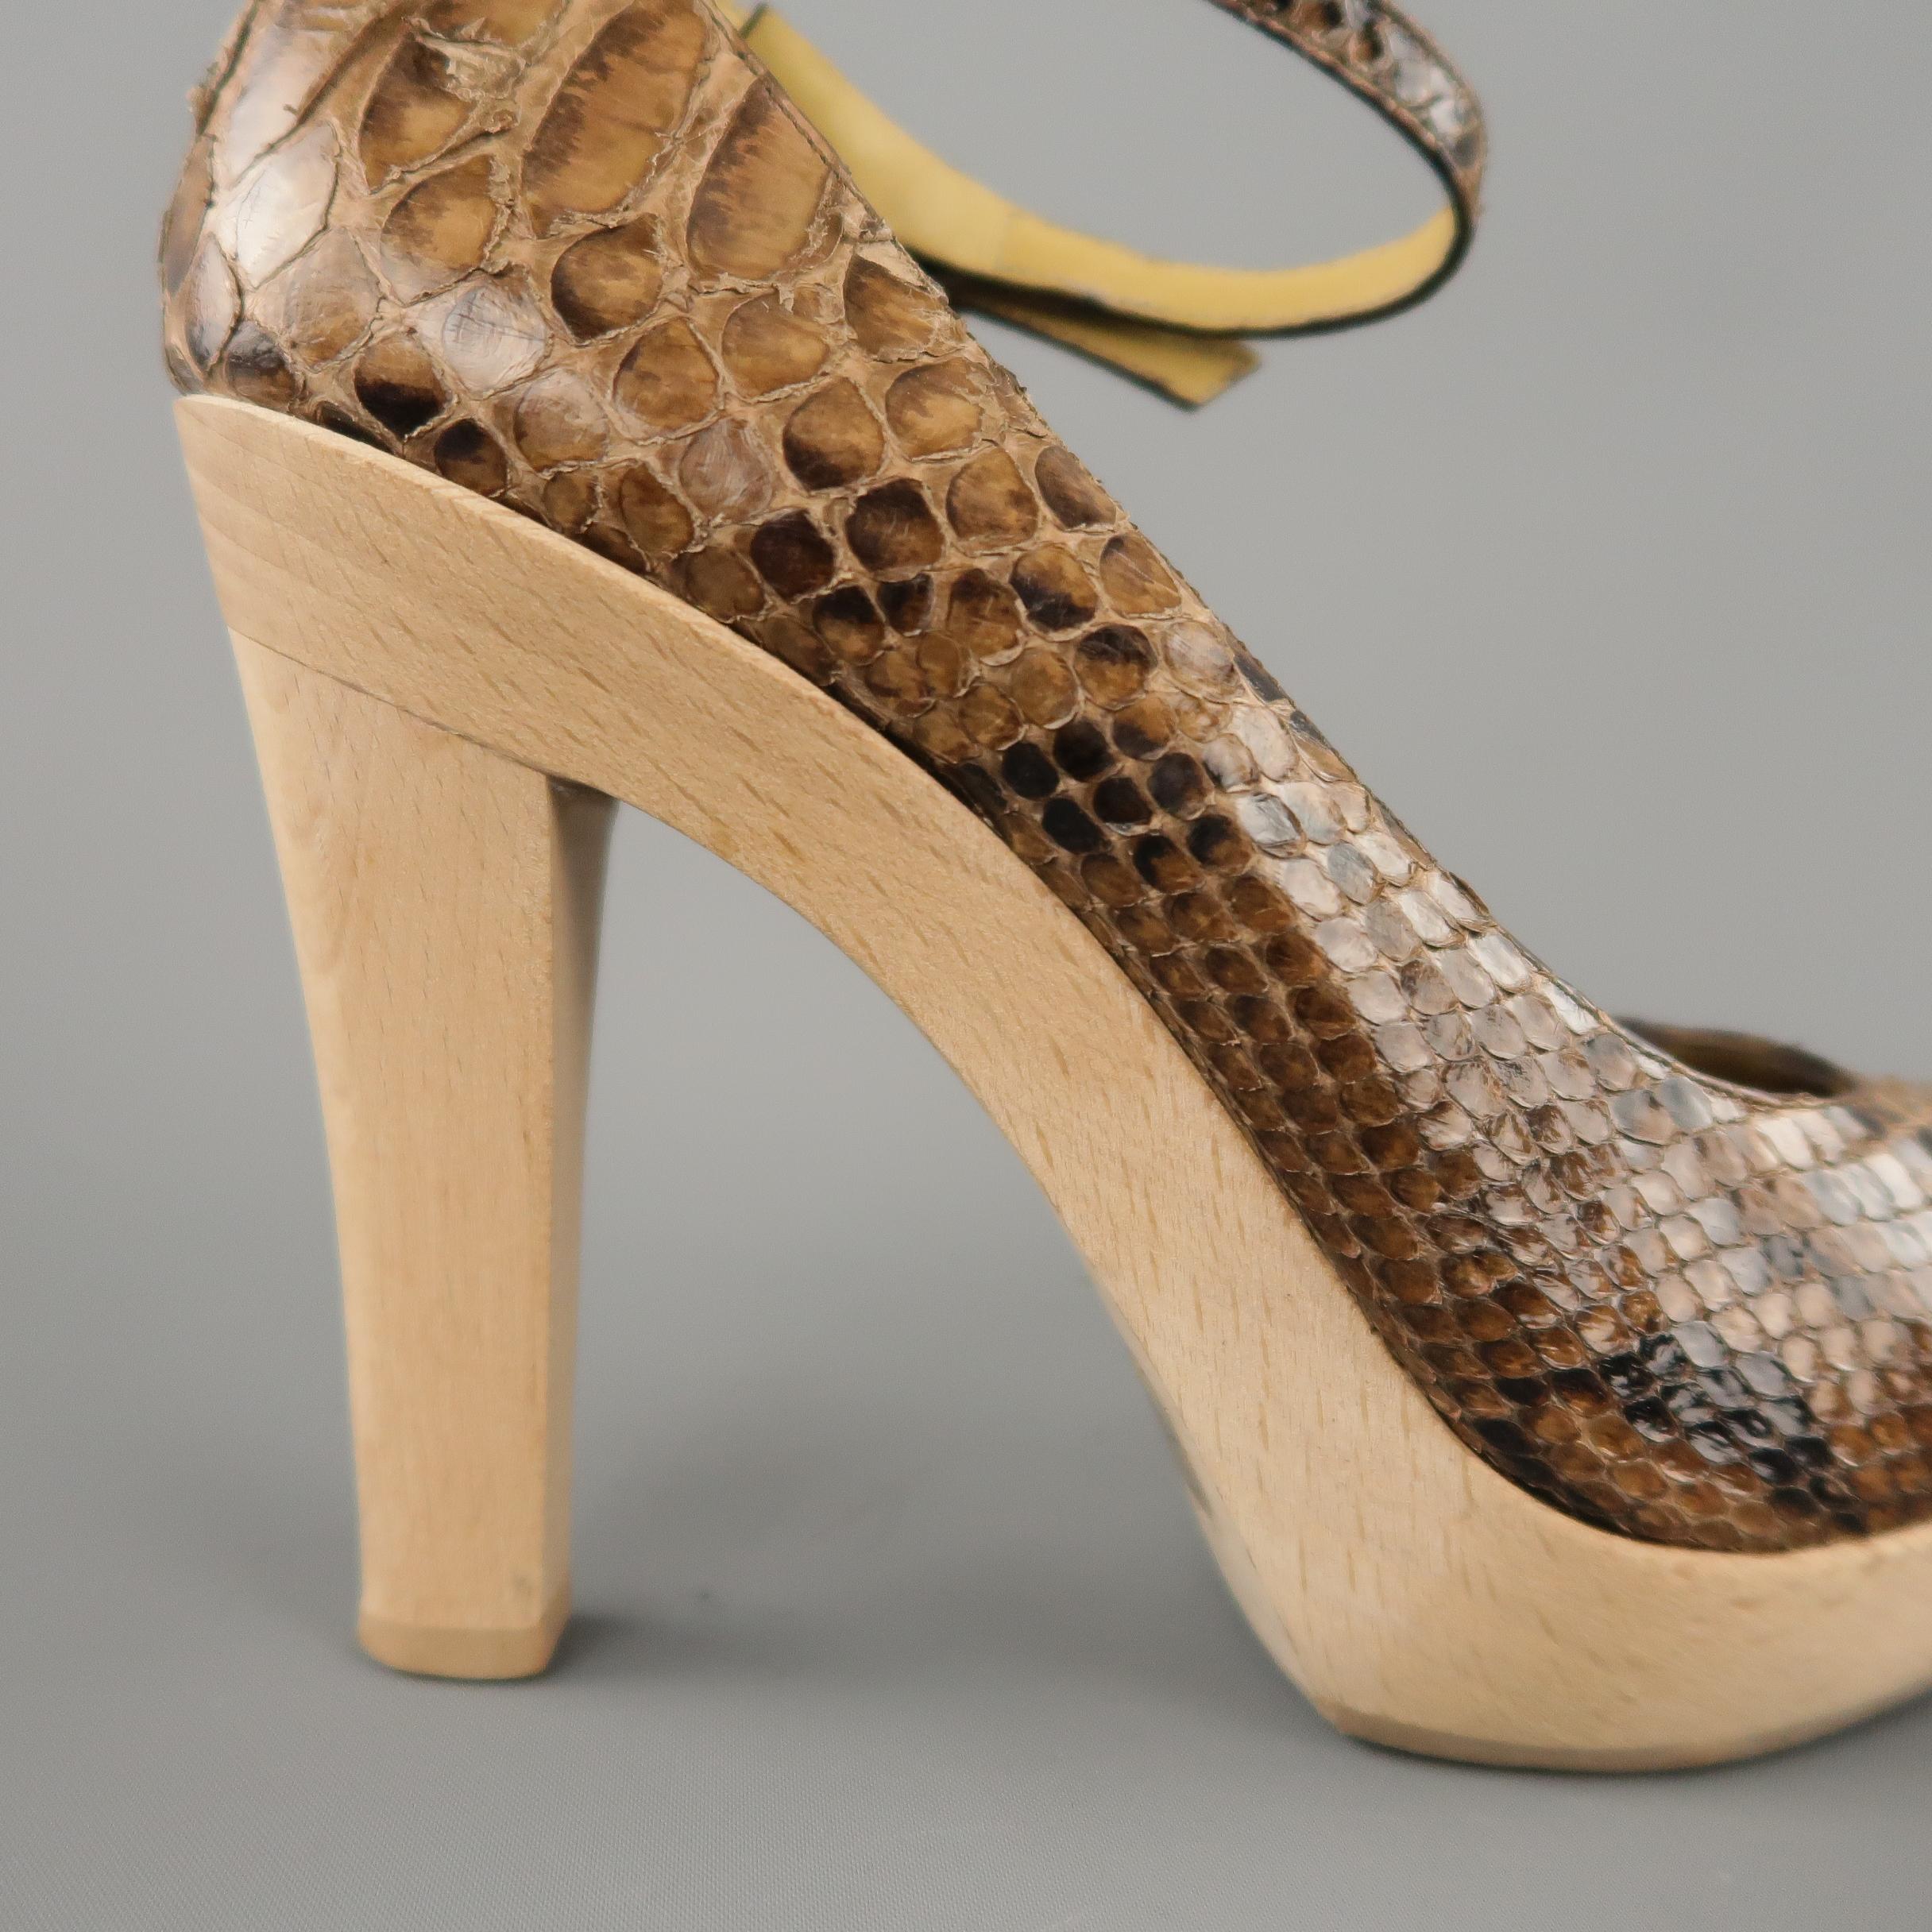 LANVIN D'orsay pumps come in tan snakeskin leather with a rounded toe, skinny ankle strap, and wooden platform with chunky heel.
 
Excellent Pre-Owned Condition.
Marked: IT 36
 
Measurements:
 
Heel: 4.5 in.
Platform: 1 in.